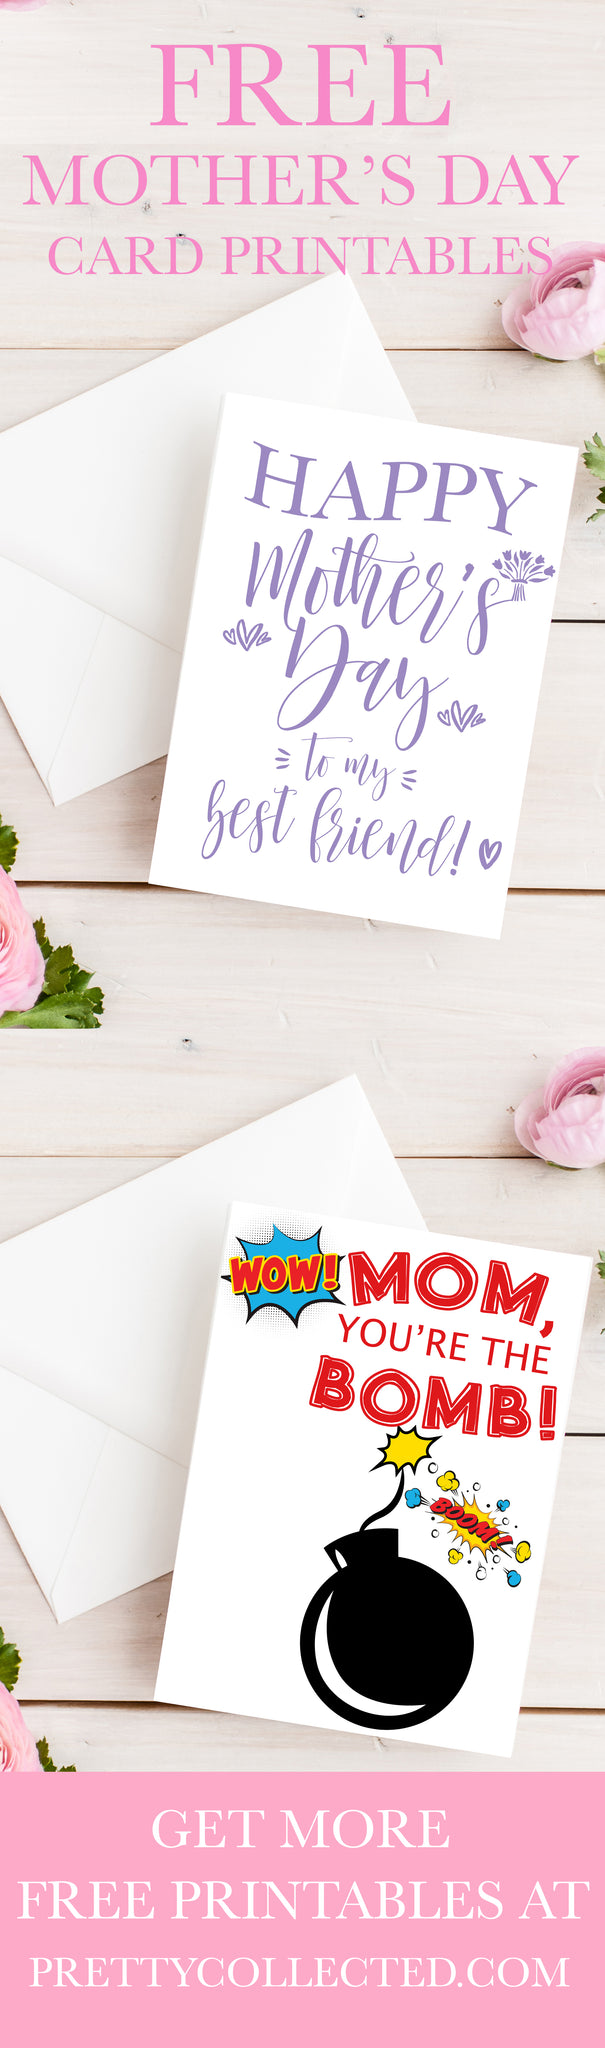 Free Mother's Day Cards Printable - Free Printables for Mother's Day - Pretty Collected